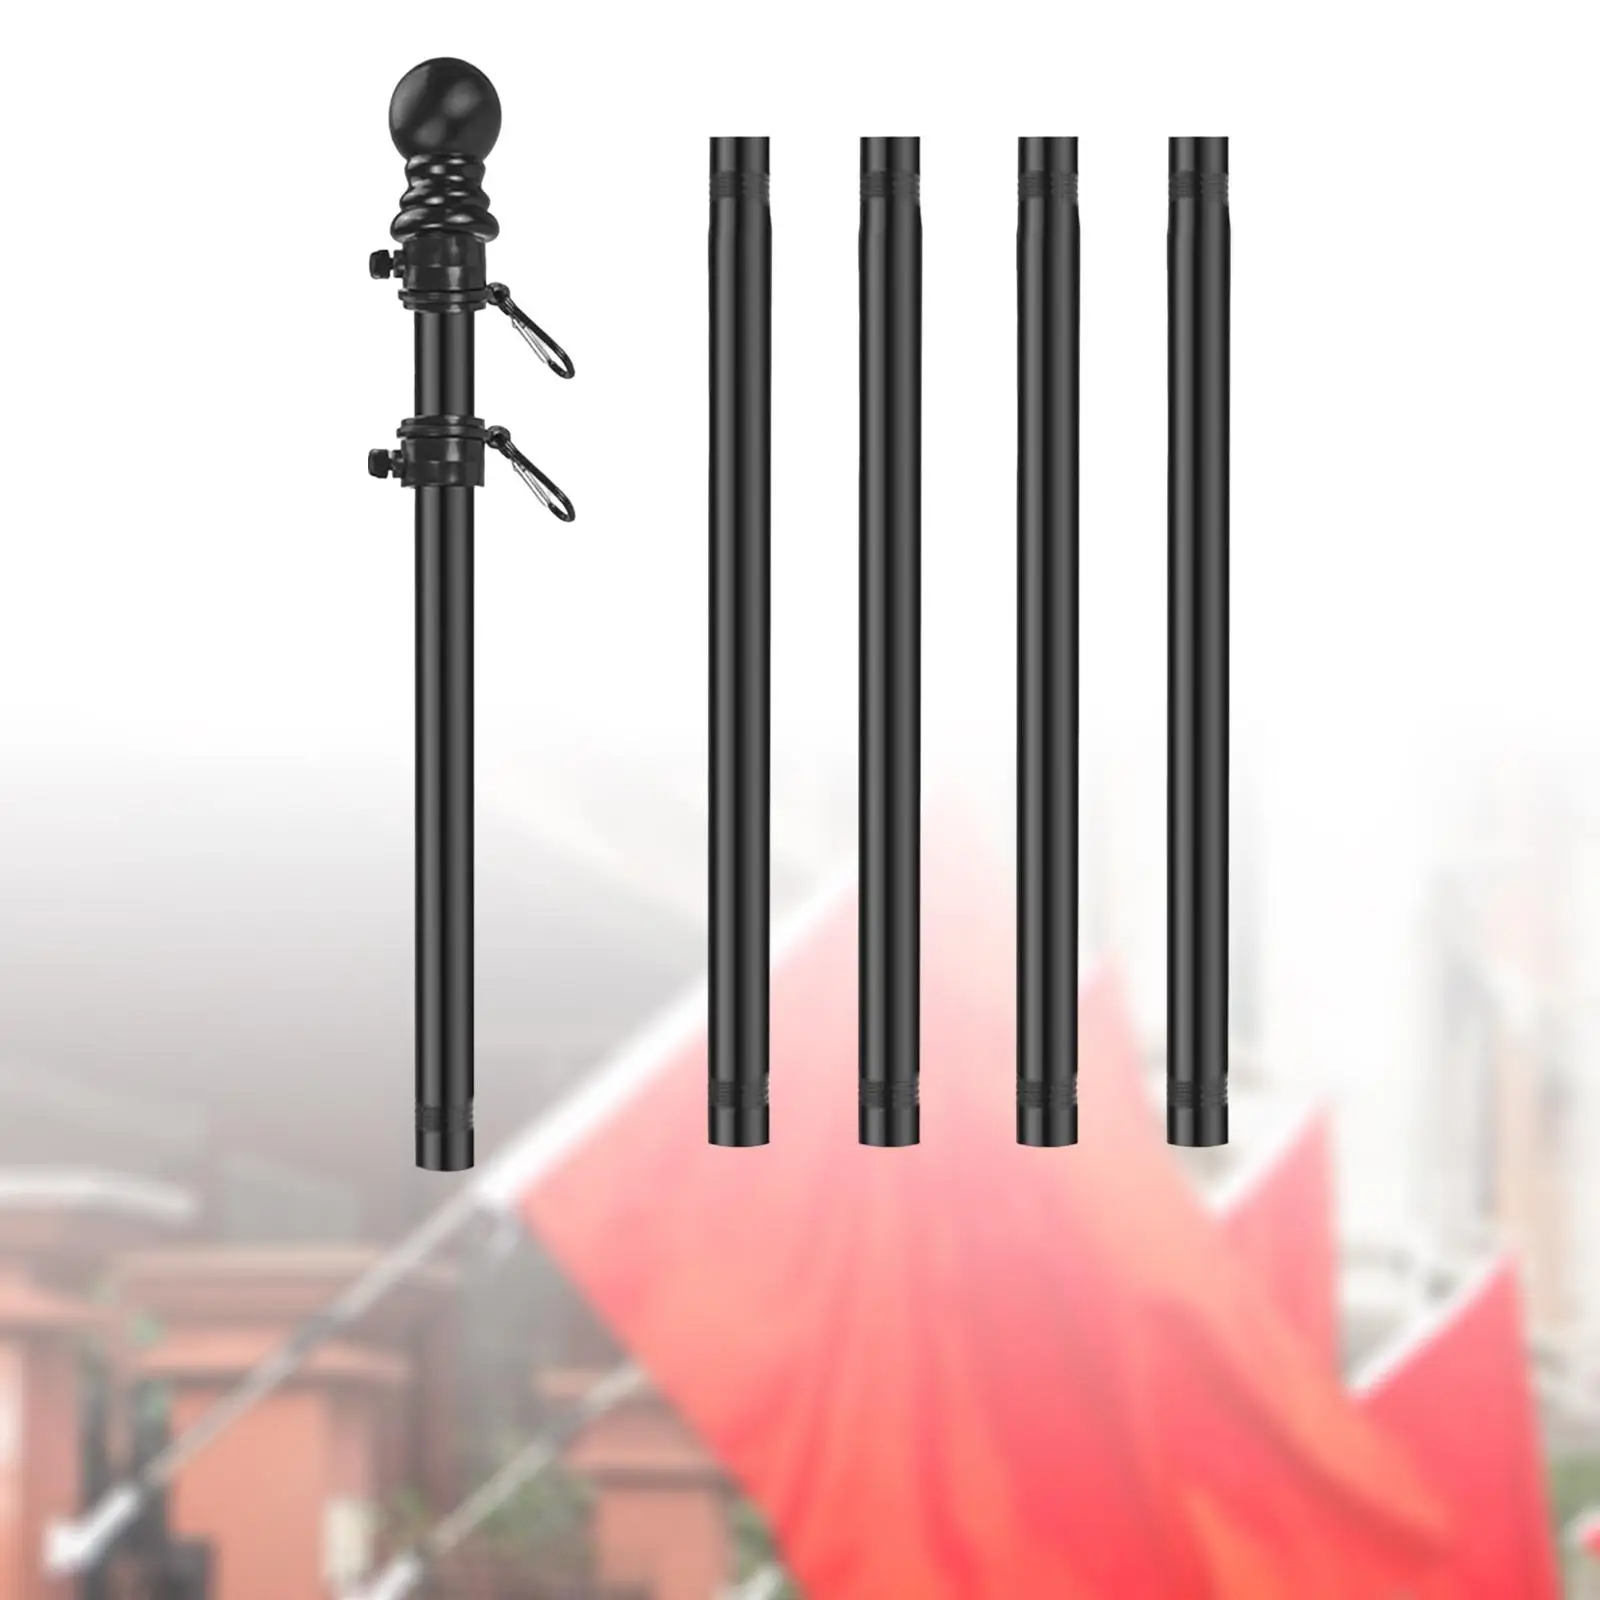 Heavy Duty Flag Pole Five Sections Rod Sturdy Rustproof Guide Banner Garden Flag Pole Commercial Flag Pole